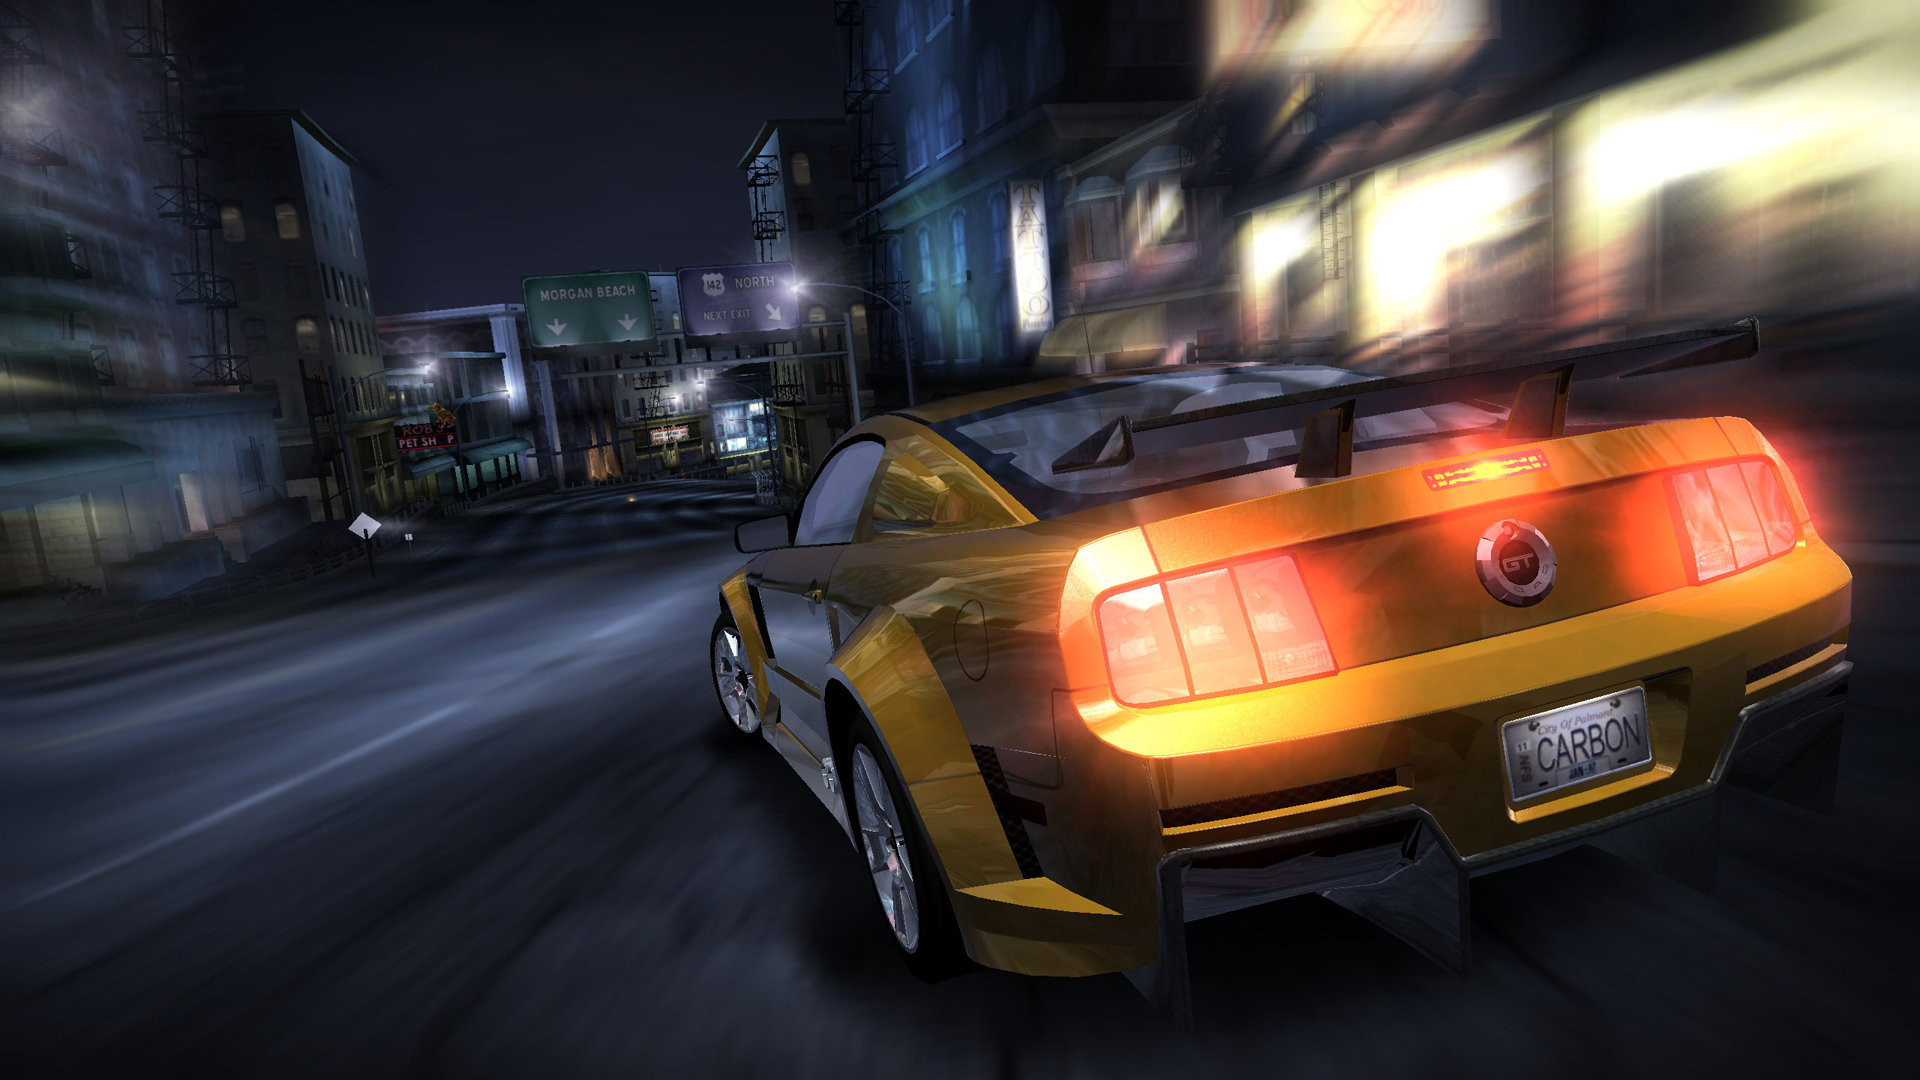 Nfs assemble. Need for Speed карбон. Нид фор СПИД карбон 2. Beed for Speed car. Need for Speed: Carbon (2006).